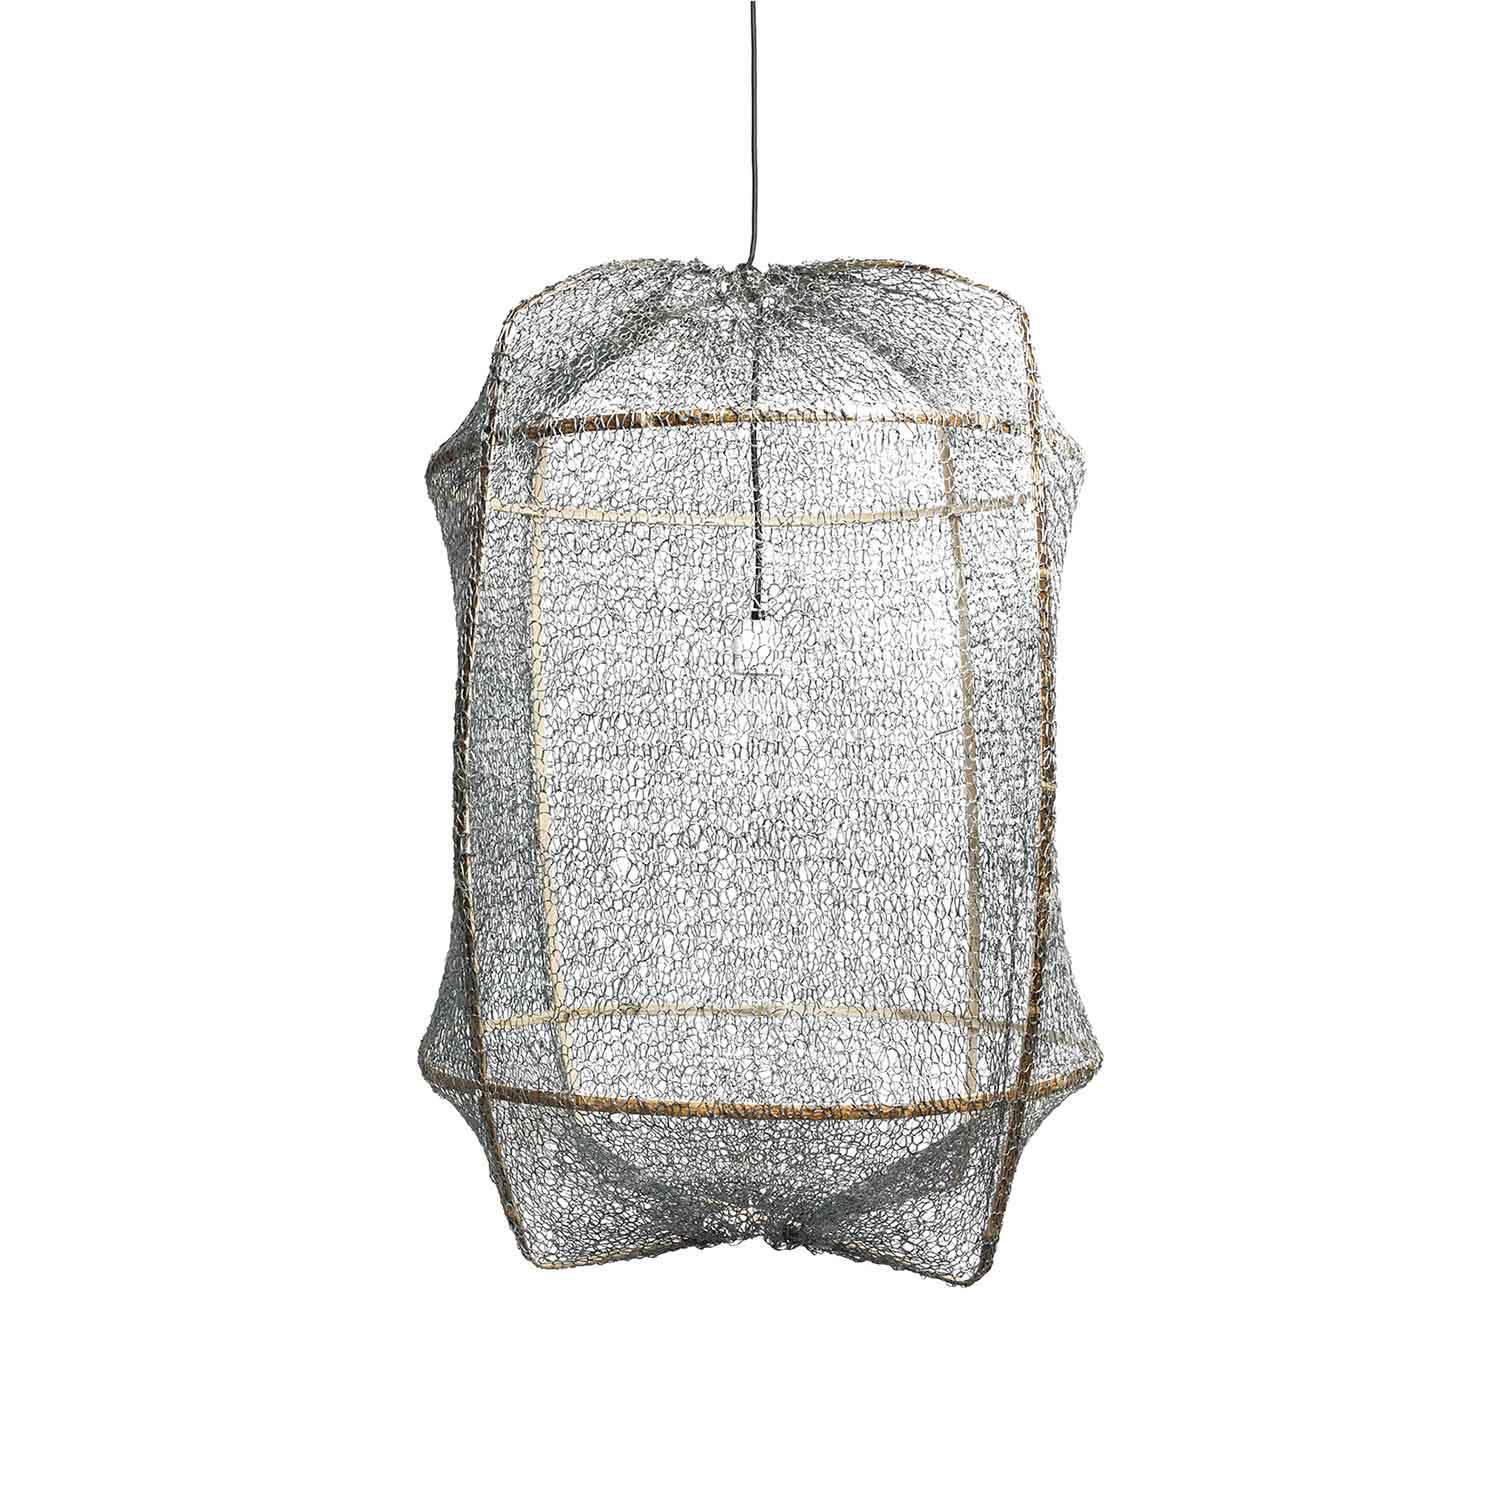 Z1 - Cage pendant lamp in bamboo and white, beige, gray or black fabric